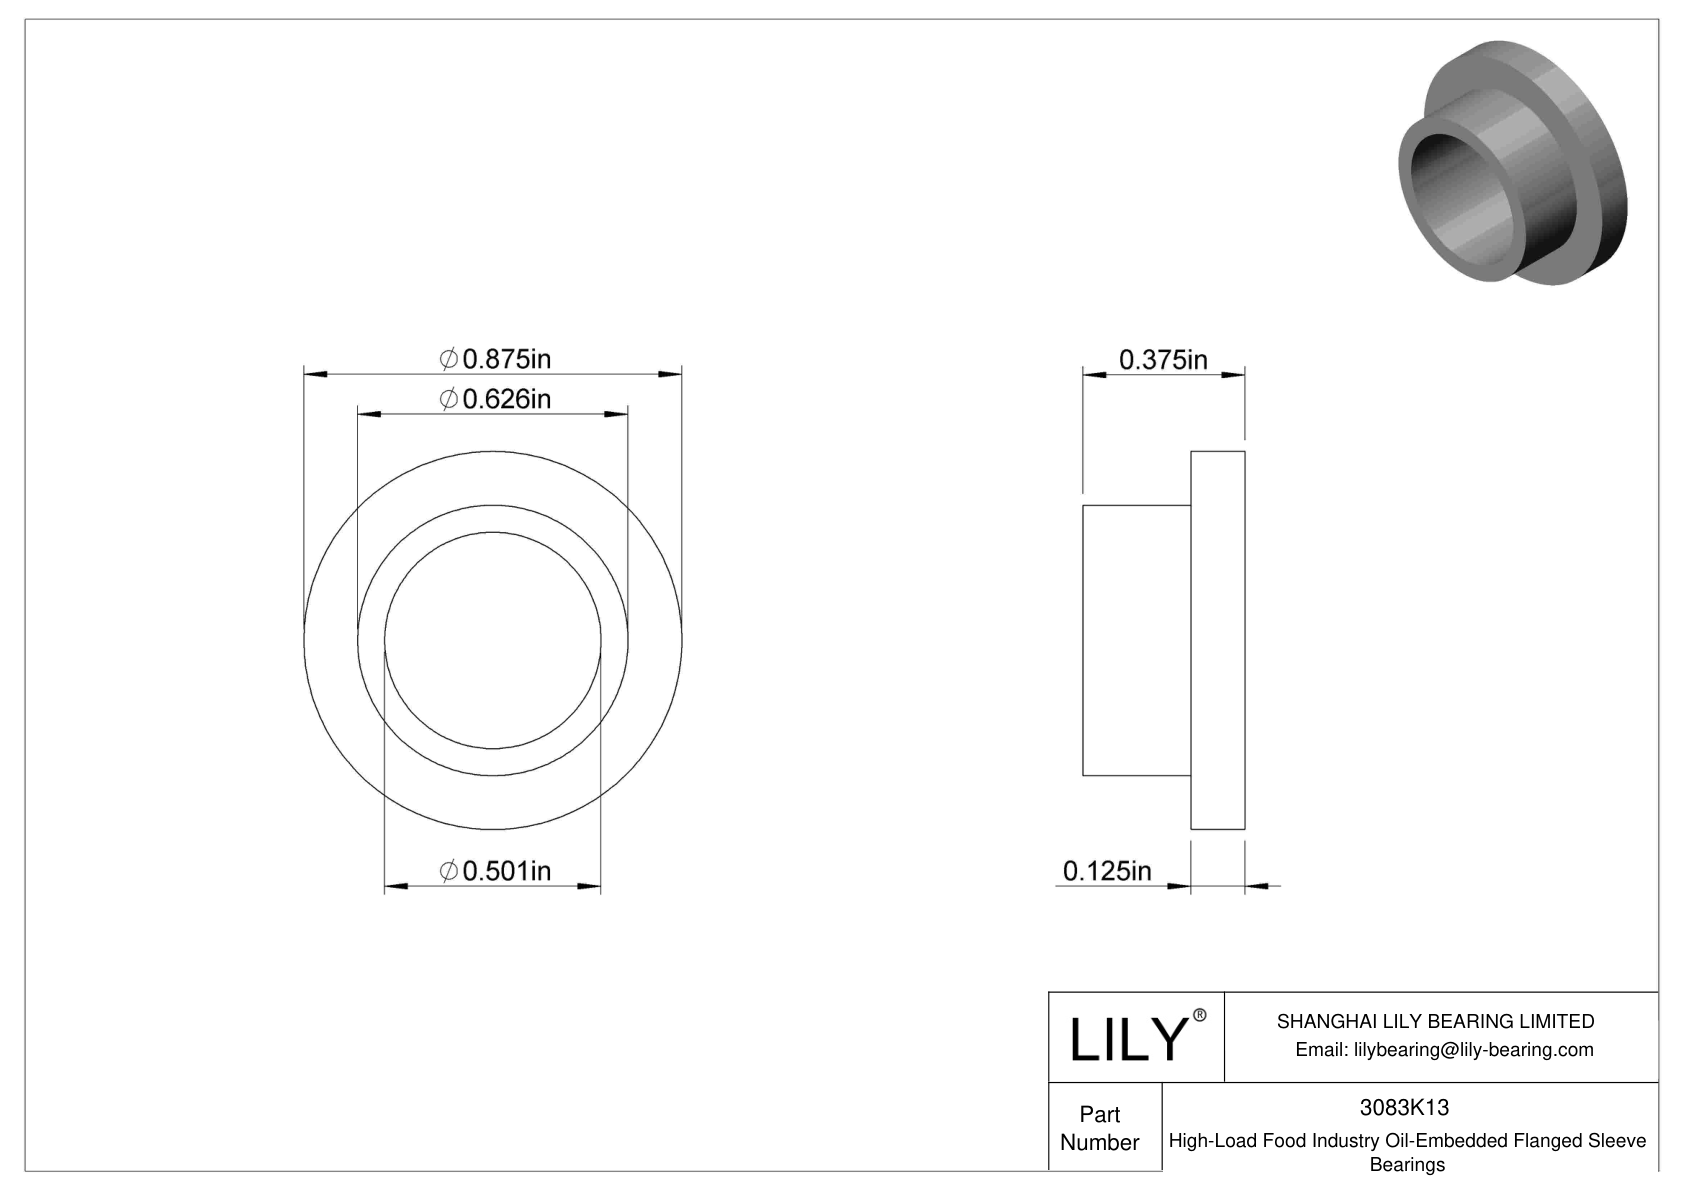 DAIDKBD High-Load Food Industry Oil-Embedded Flanged Sleeve Bearings cad drawing